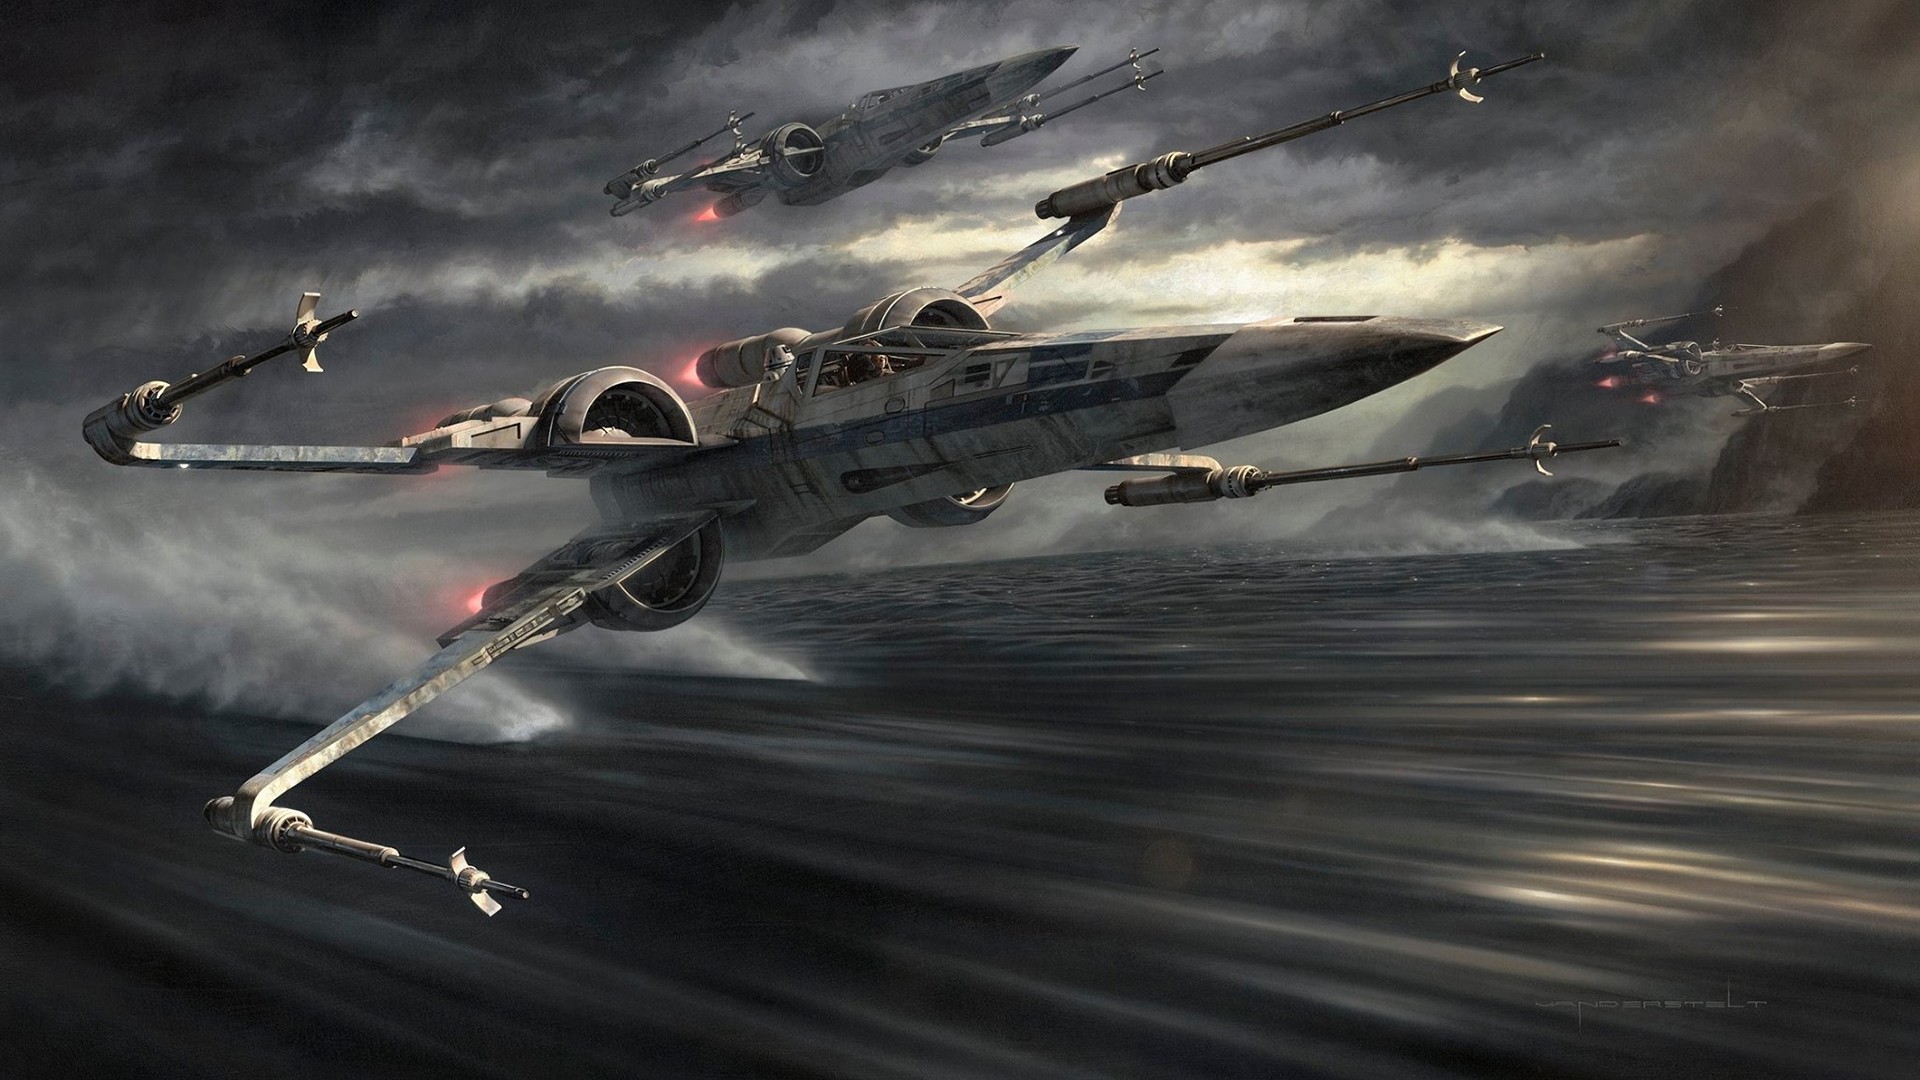 Star Wars The Force Awakens inspired lithograph print, Incom Tearin It Up by Jerry Vanderstelt featuring the X Wing fighter in action